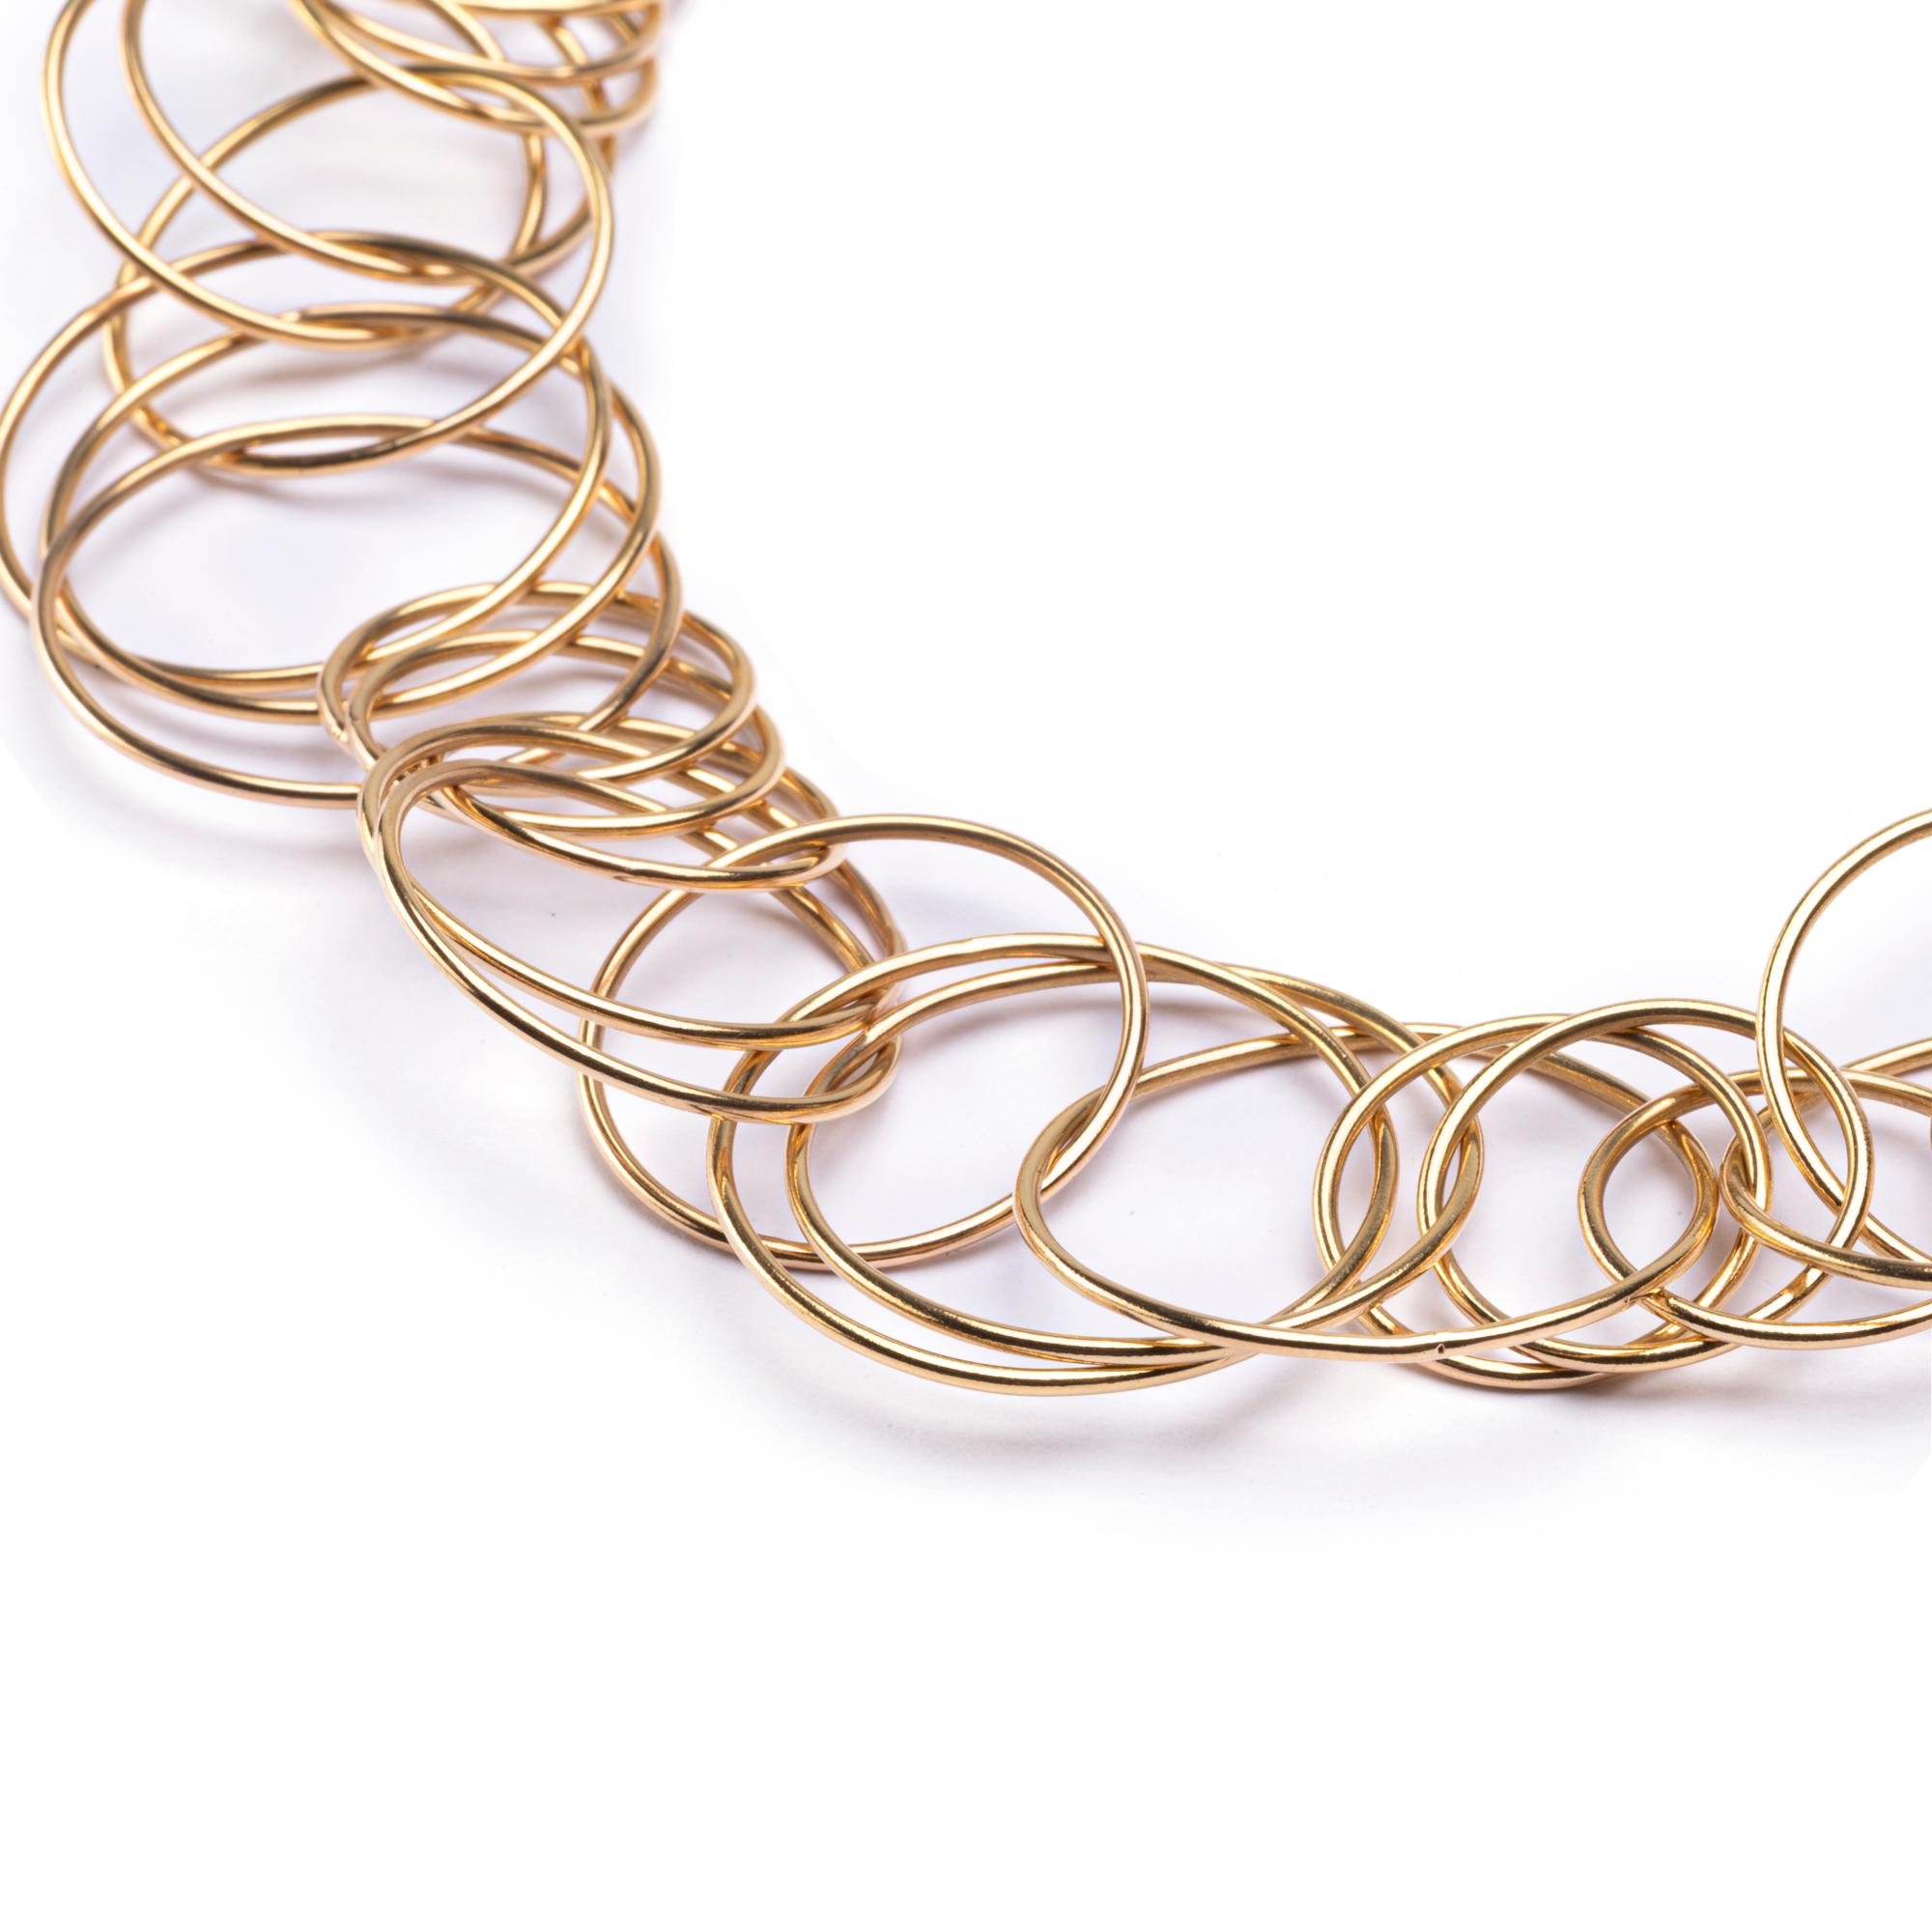 Alex Jona design collection, hand crafted in Italy, 18 Karat yellow gold, multi interlocking hoop chain necklace . Length 21.26 in / 54.6 cm.

Alex Jona jewels stand out, not only for their special design and for the excellent quality of the